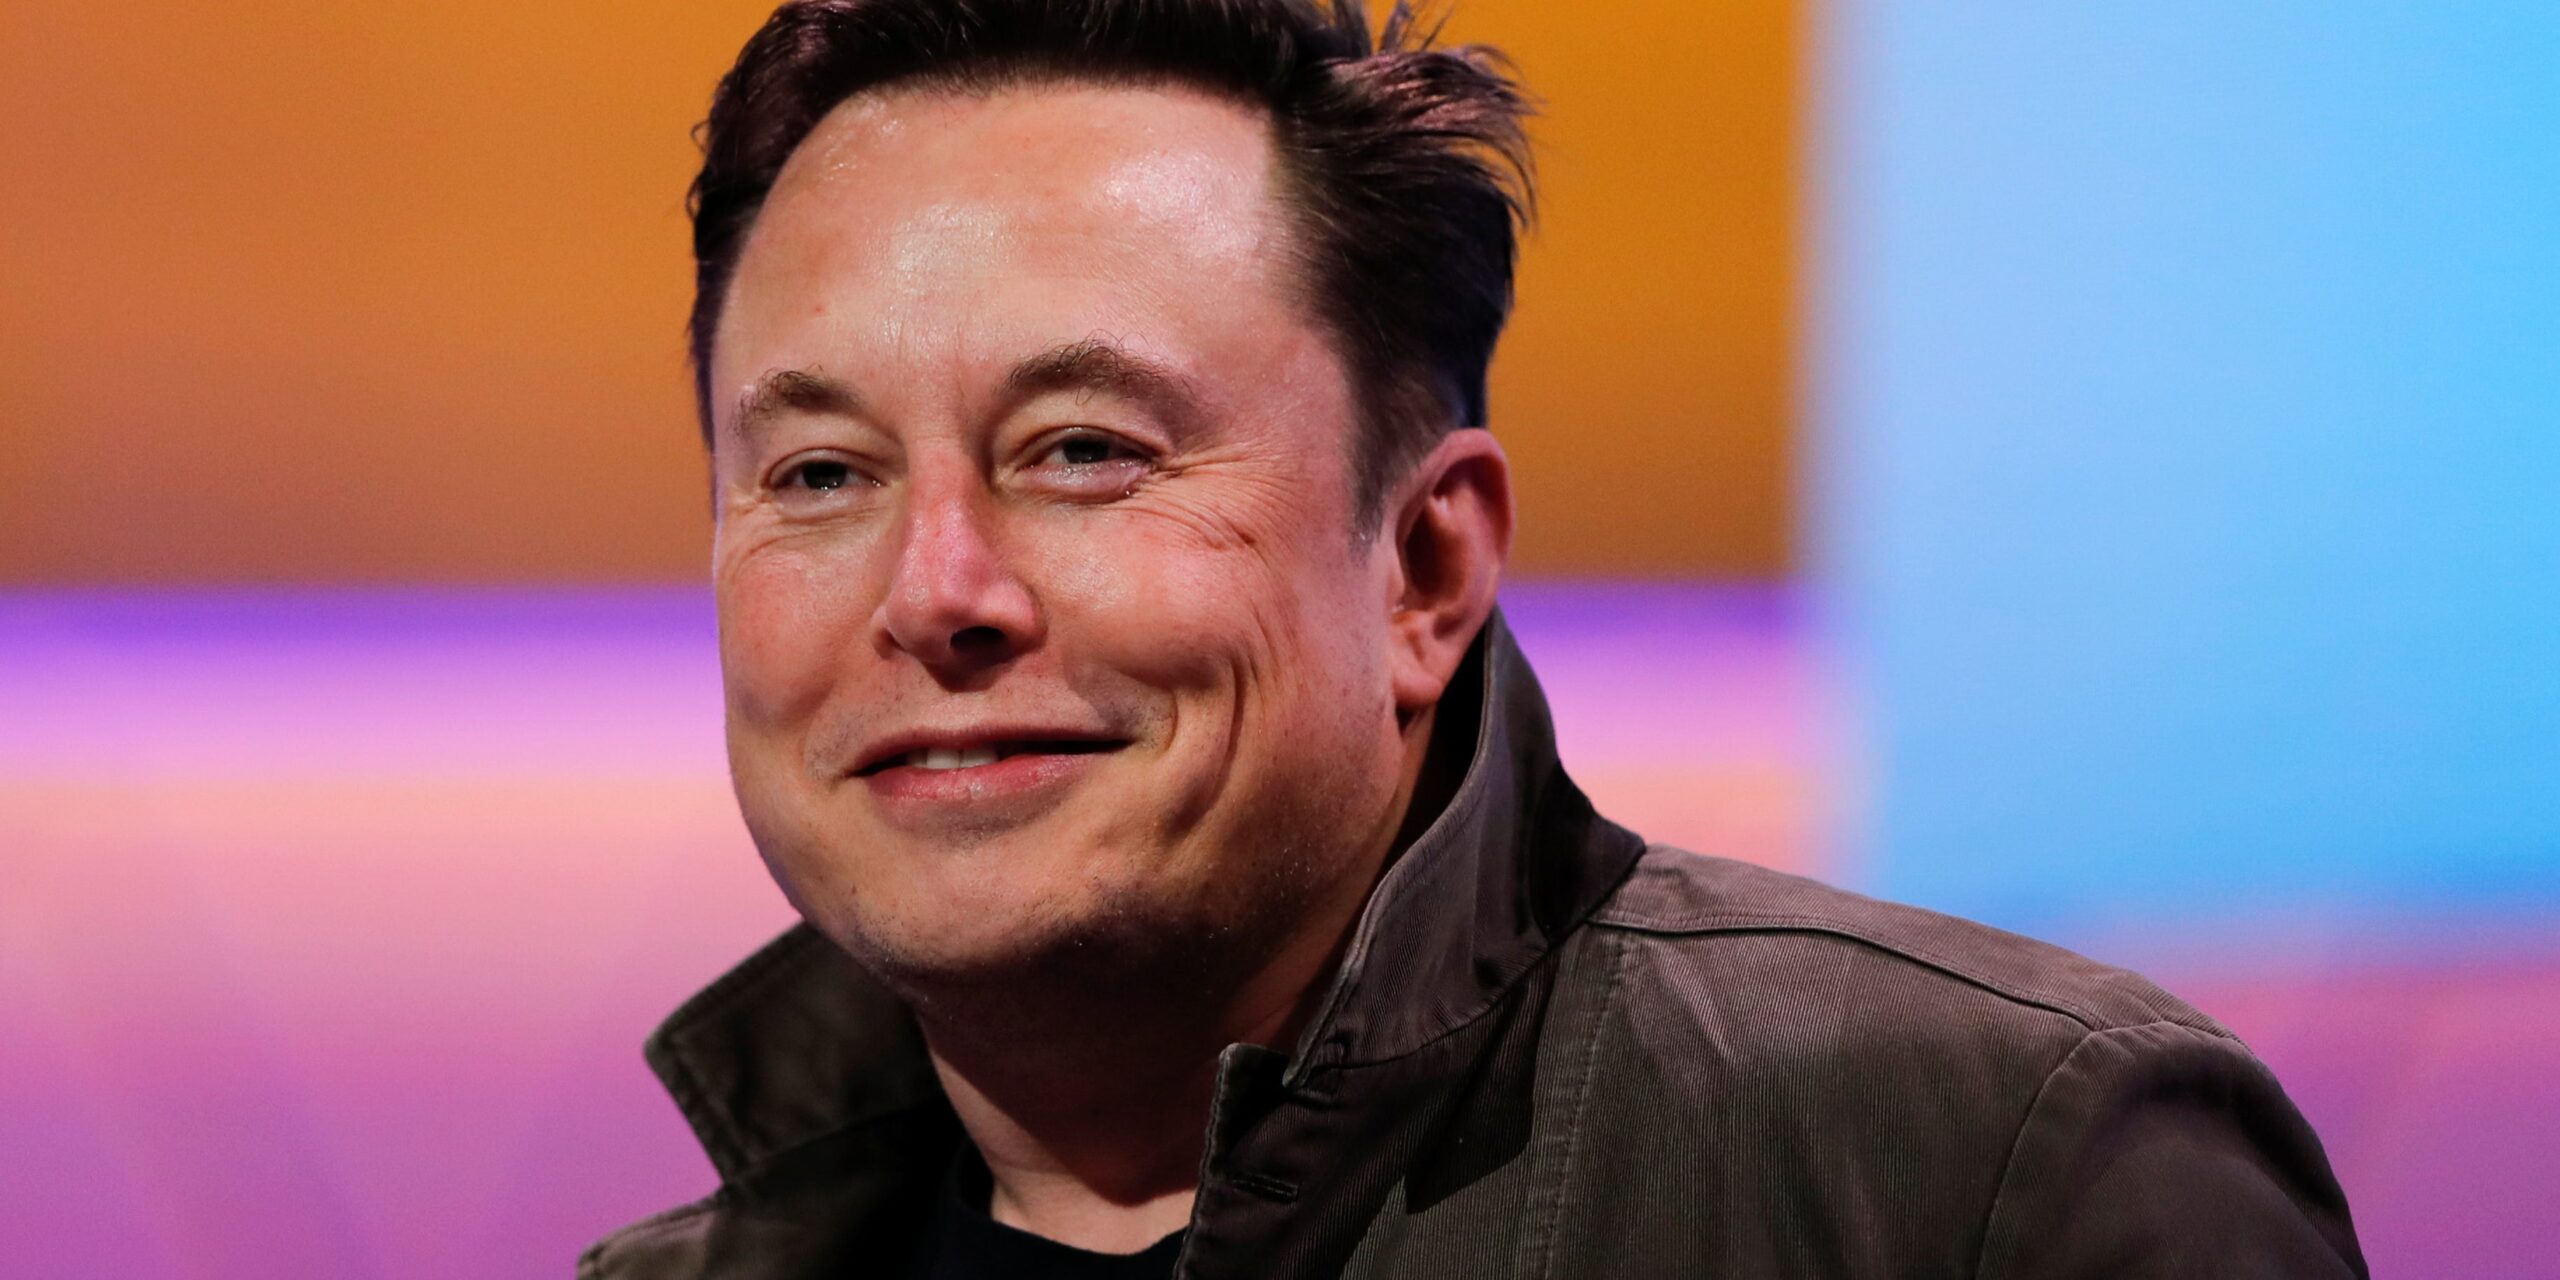 Elon Musk said he’d sell all his houses to fund colonizing Mars – but he’s kept one in California that he rents out for ‘events’